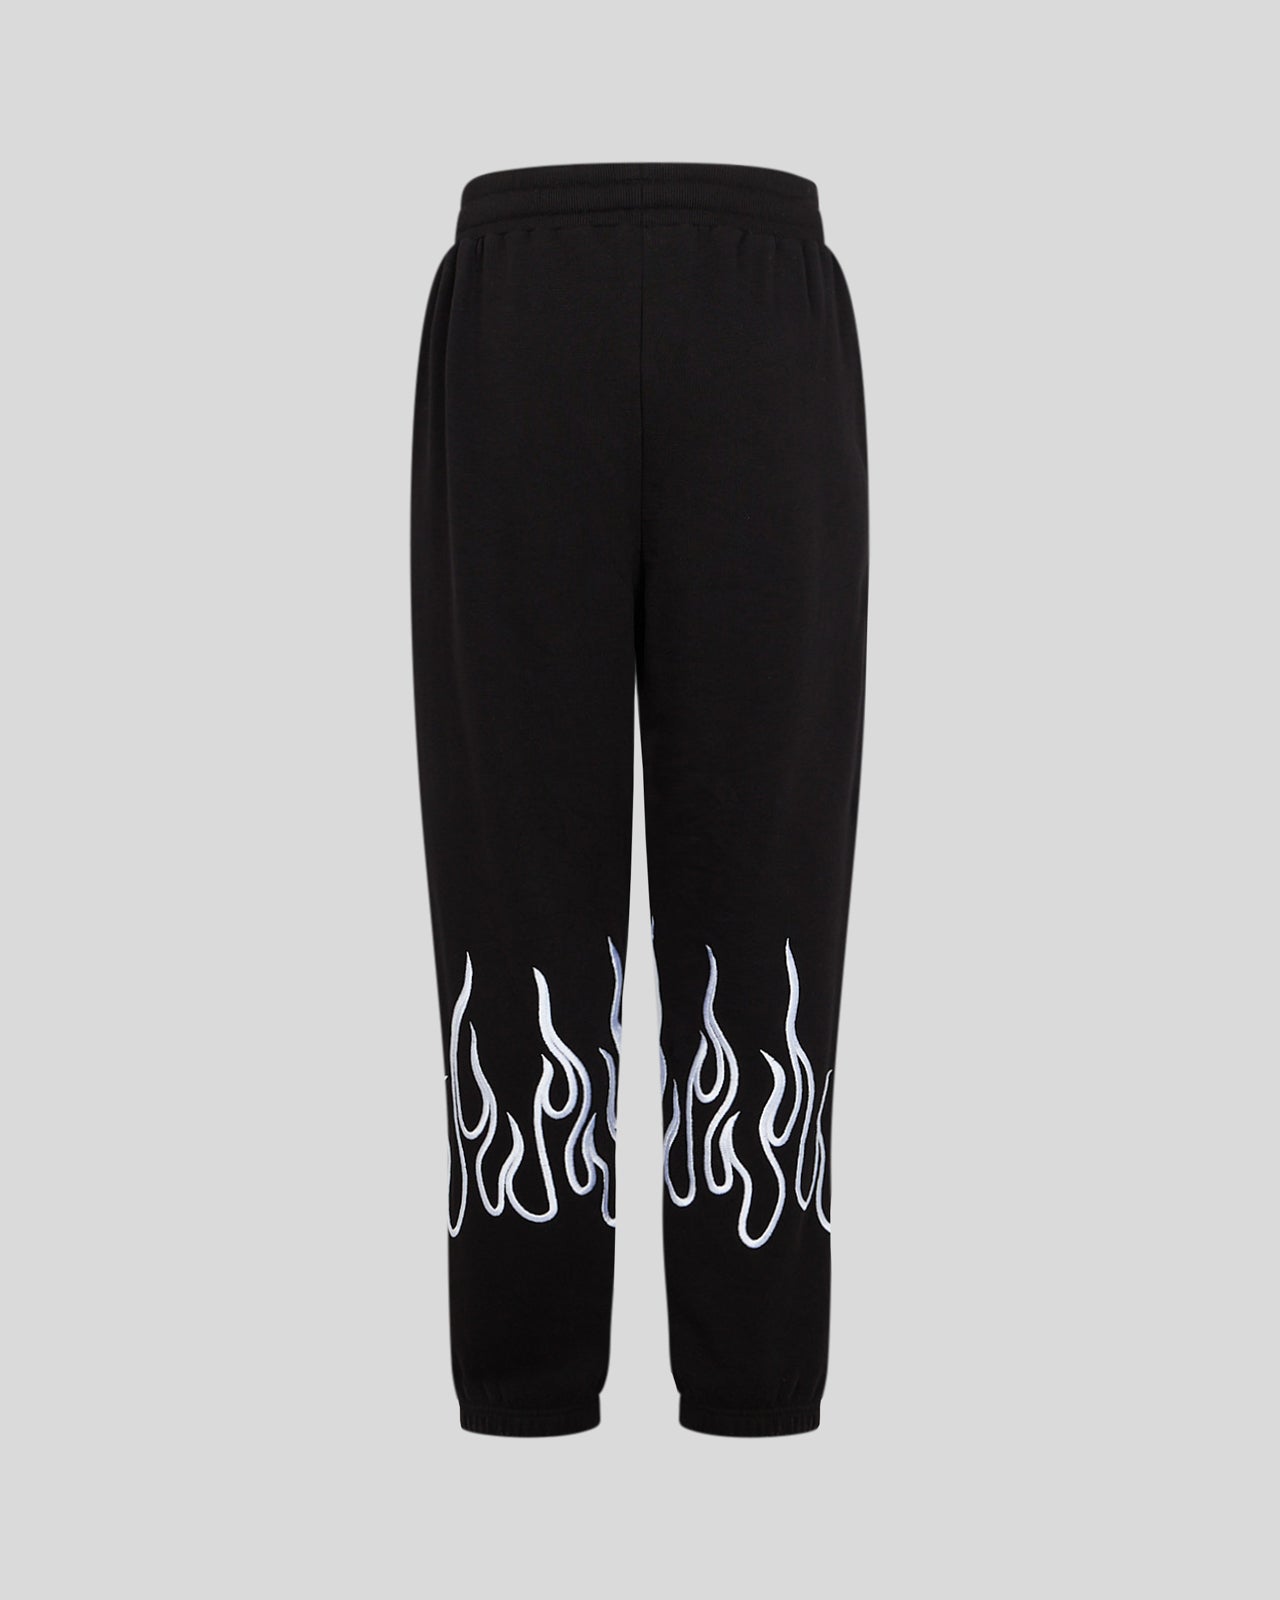 VISION OF SUPER BLACK PANTS WITH WHITE EMBROIDERED FLAMES